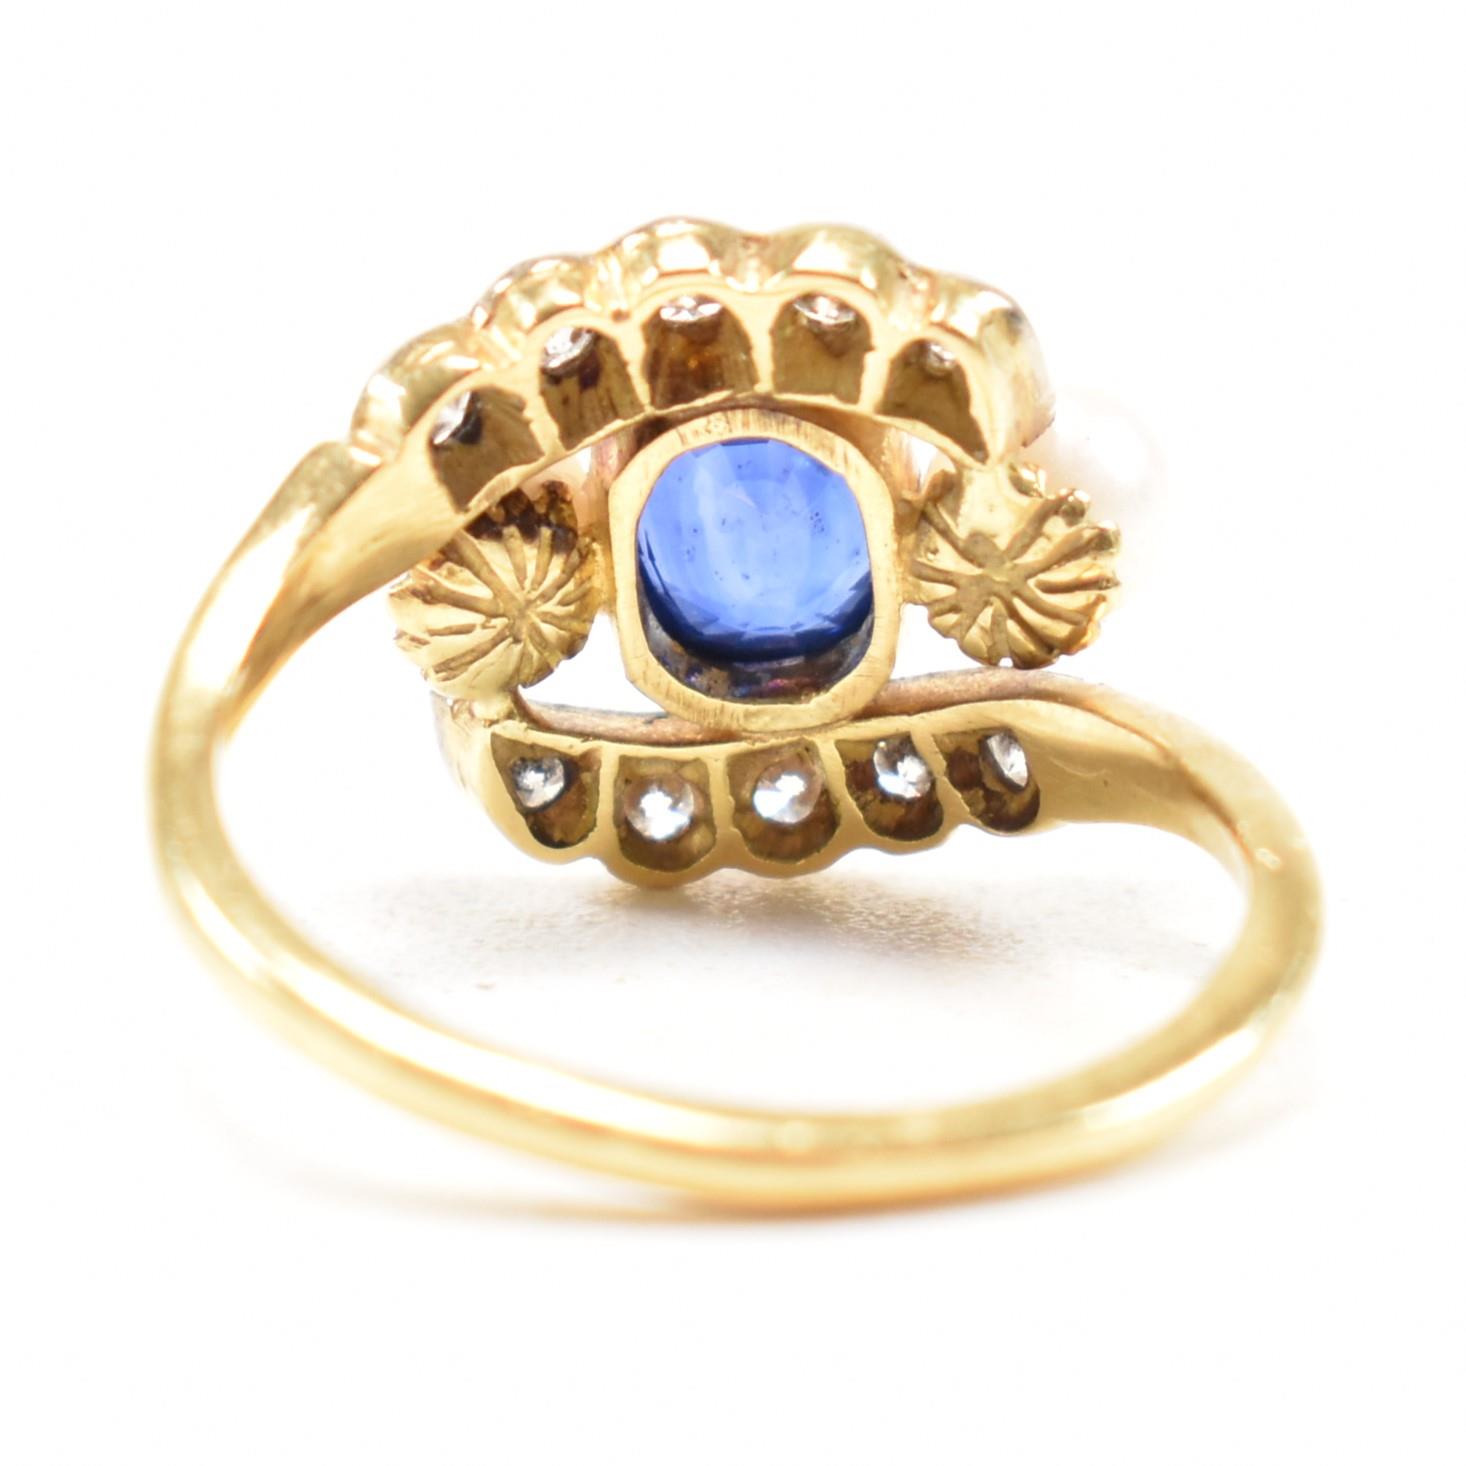 SAPPHIRE DIAMOND & PEARL CLUSTER CROSSOVER RING - Image 5 of 6